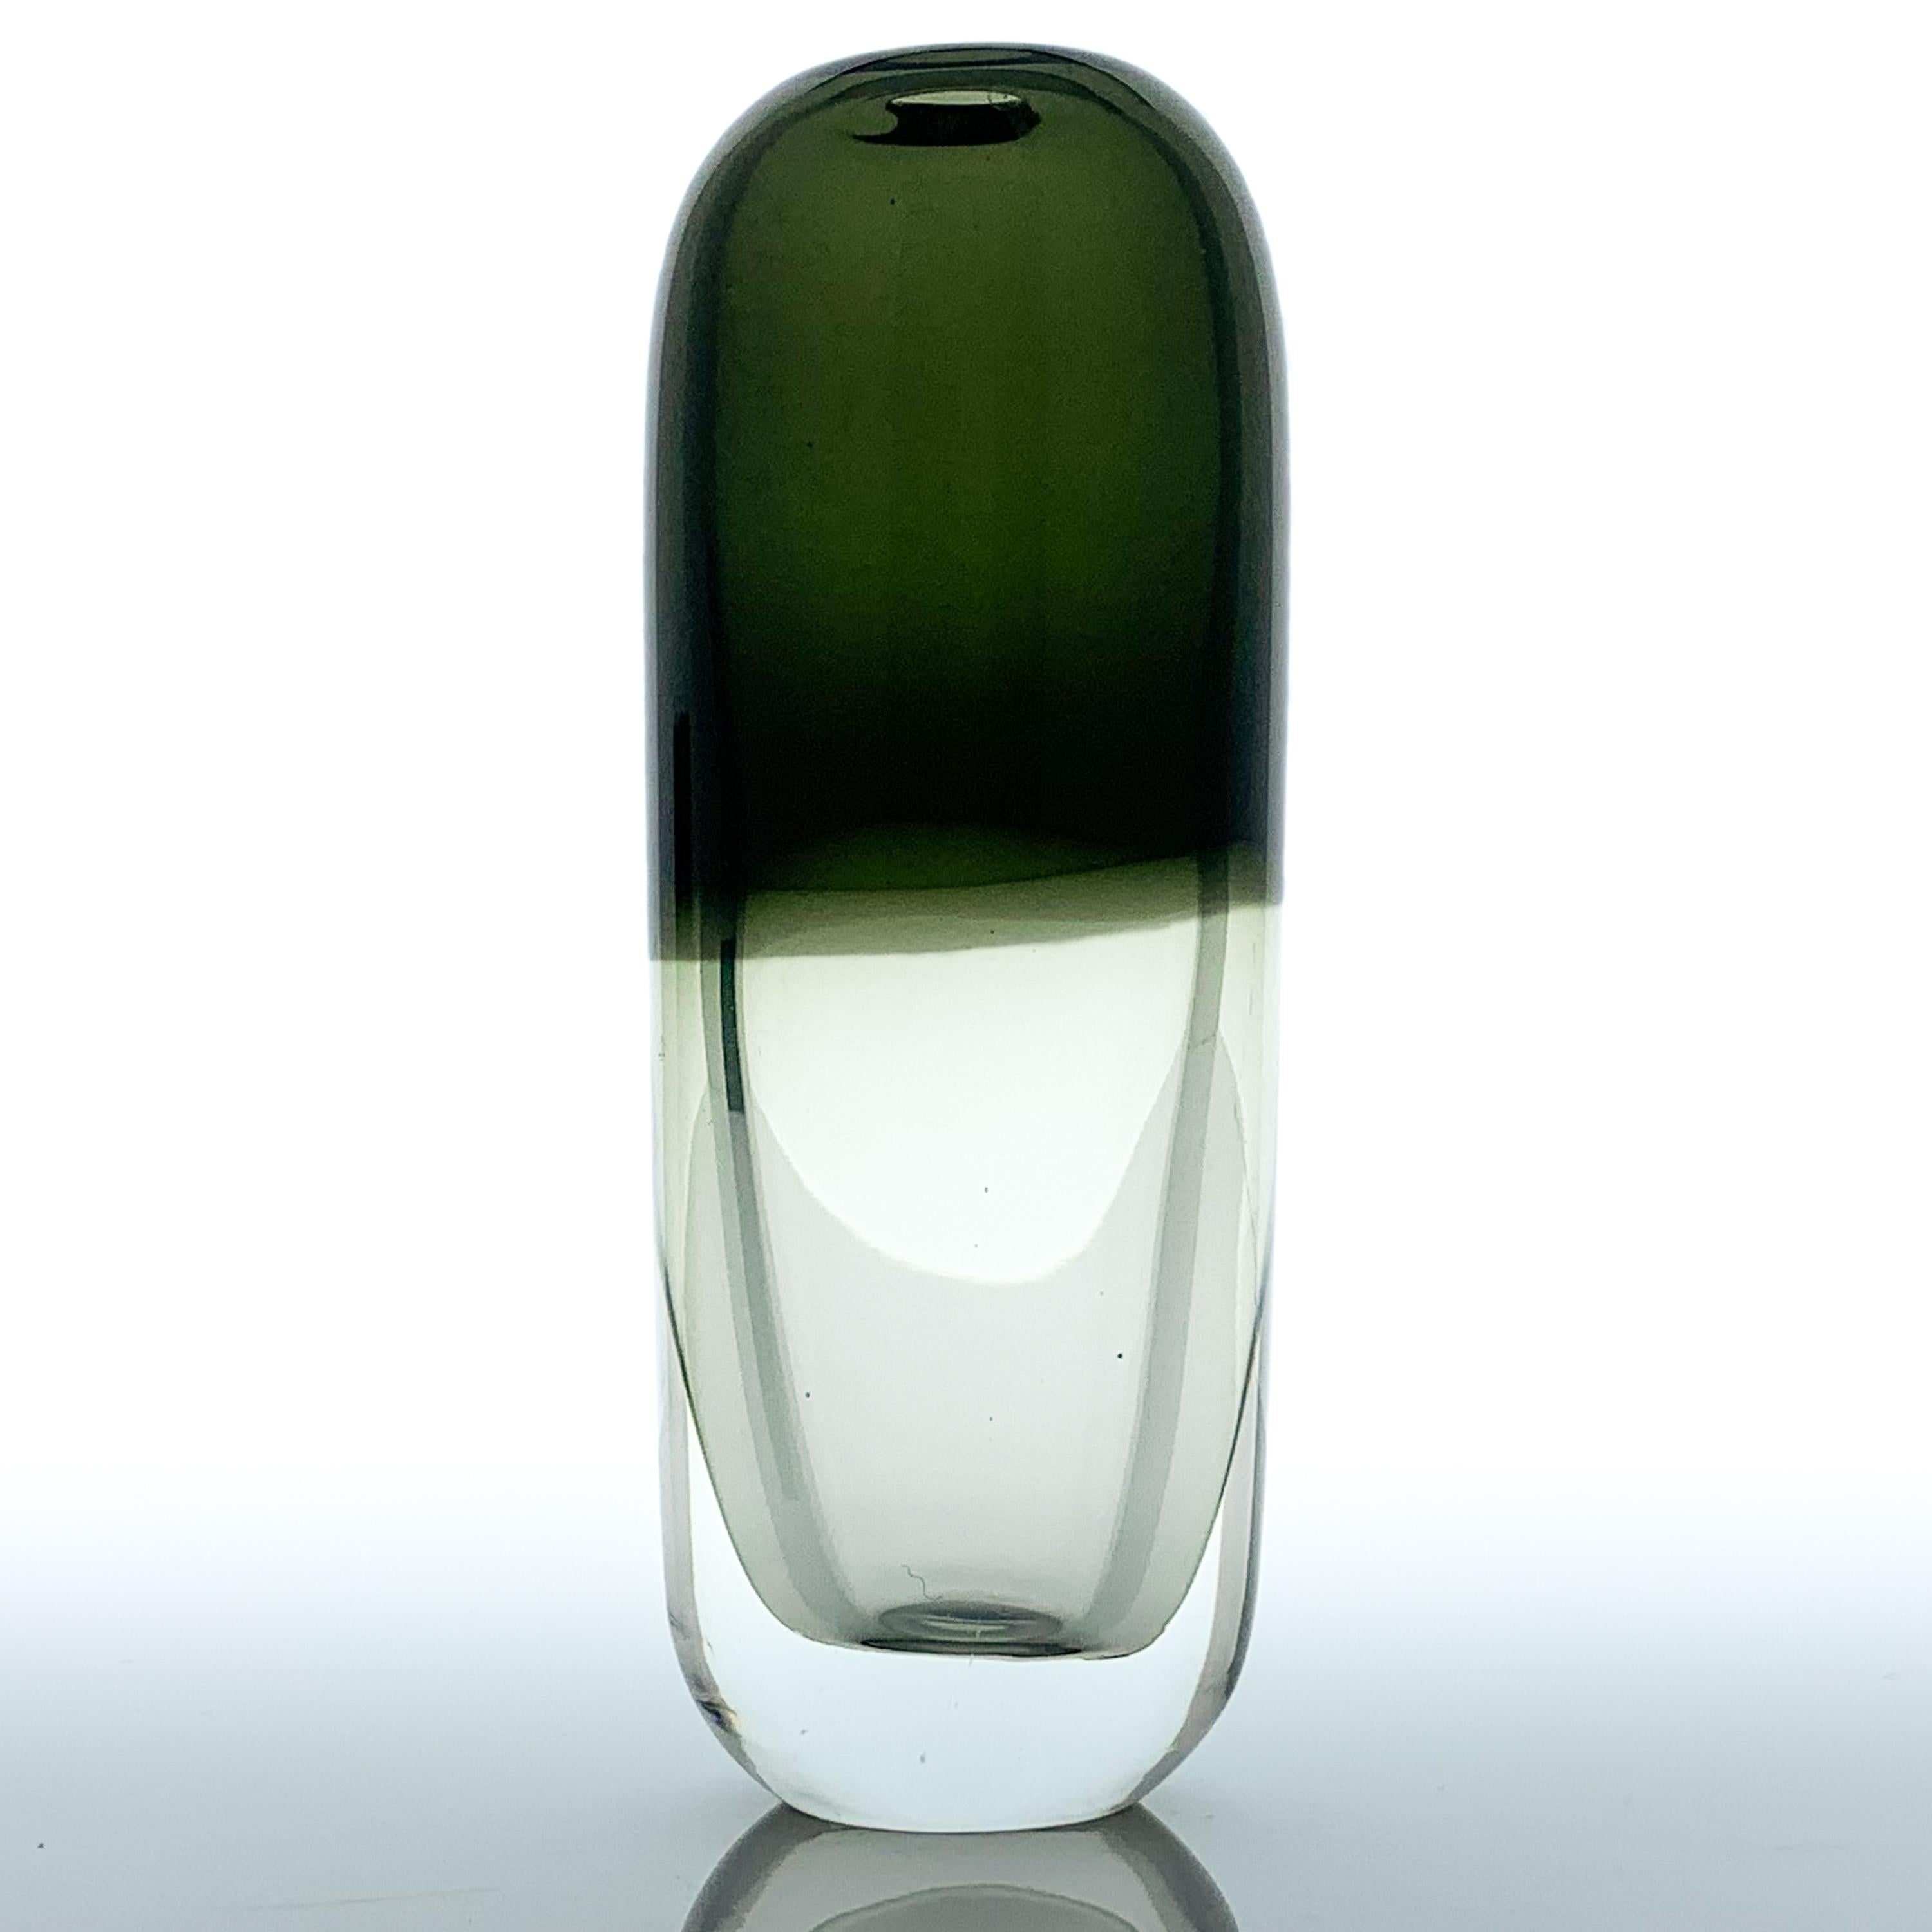 Timo Sarpaneva - Clear and darkgreen glass art-object, model 3599 - Iittala 1957

Artist
Timo Sarpaneva (Helsinki, Finland 1926 – Helsinki, Finland 2006) was an influential Finnish designer, sculptor, and educator best known in the art world for